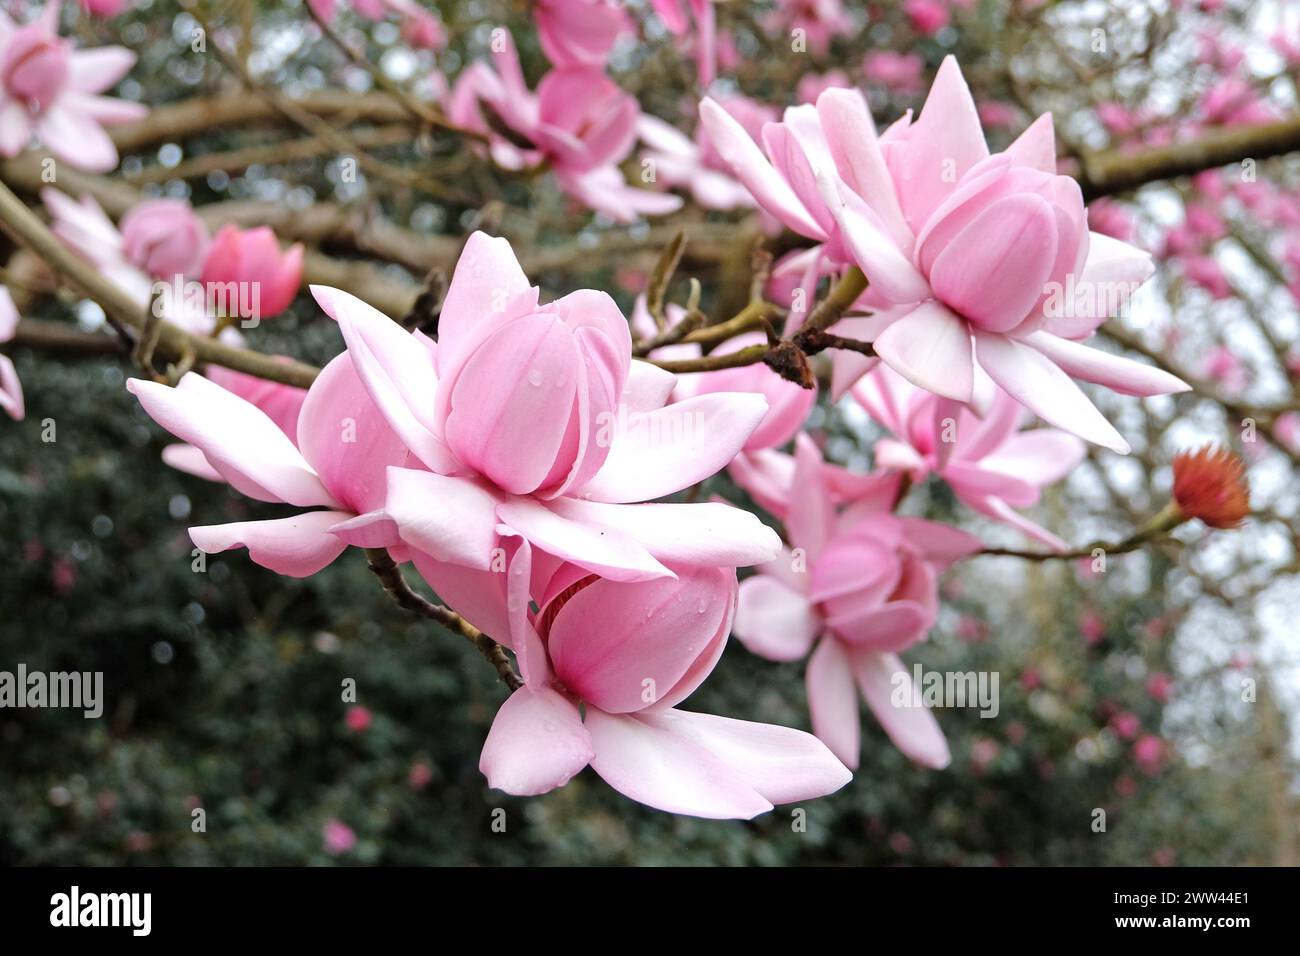 Pink Magnolia campbellii, or Campbell's magnolia in flower. Stock Photo